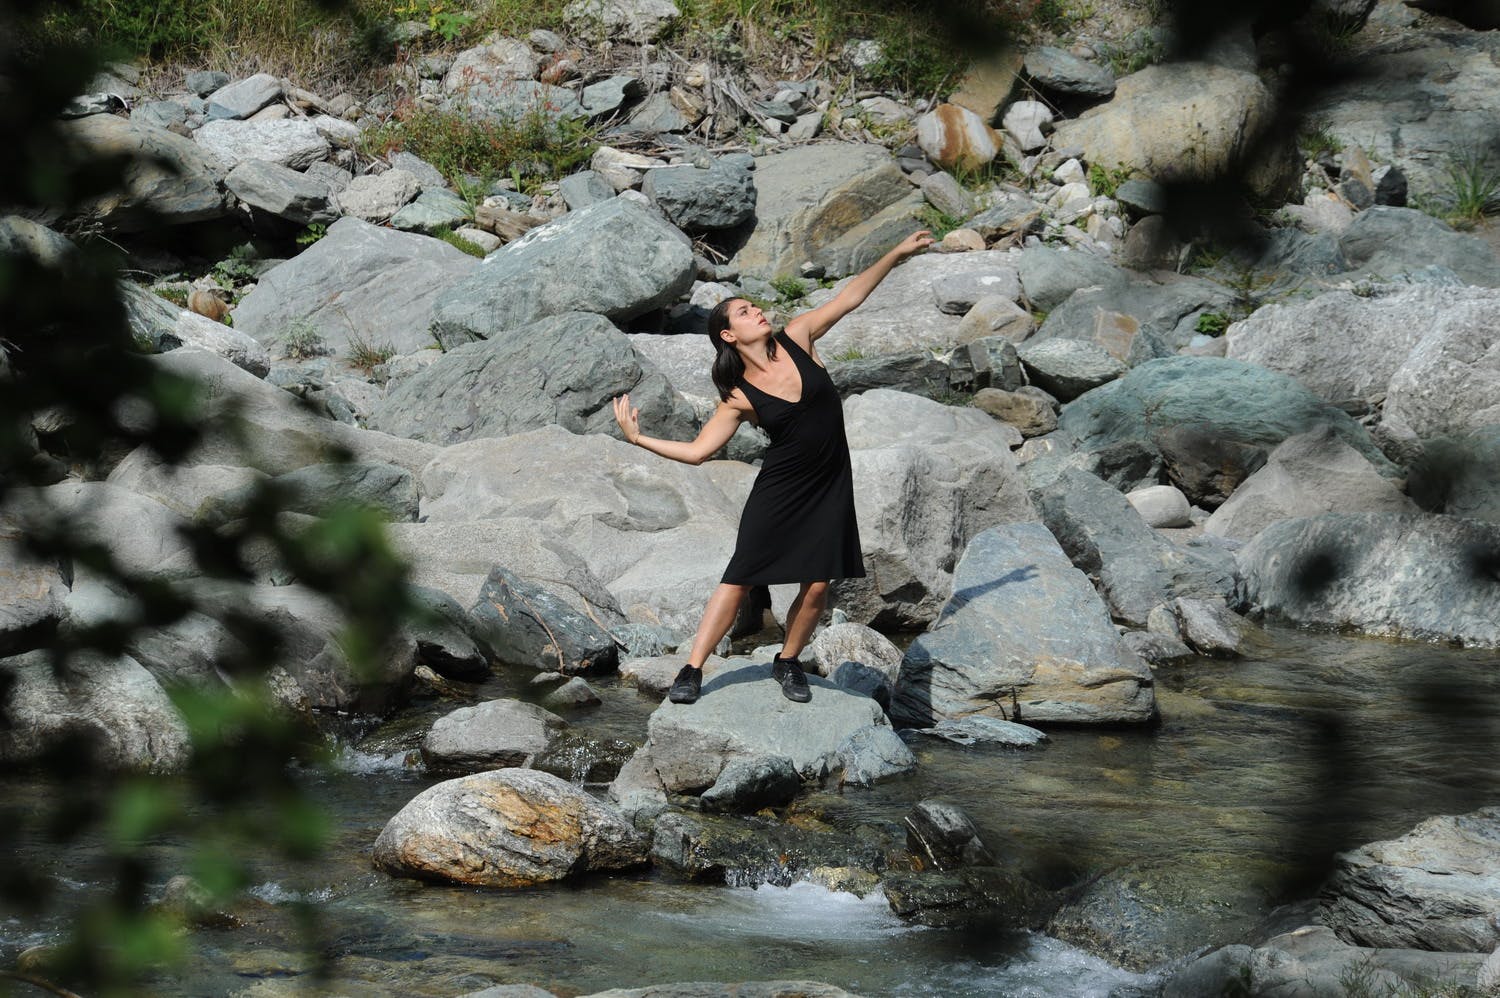 The dancer is standing on a river rock.